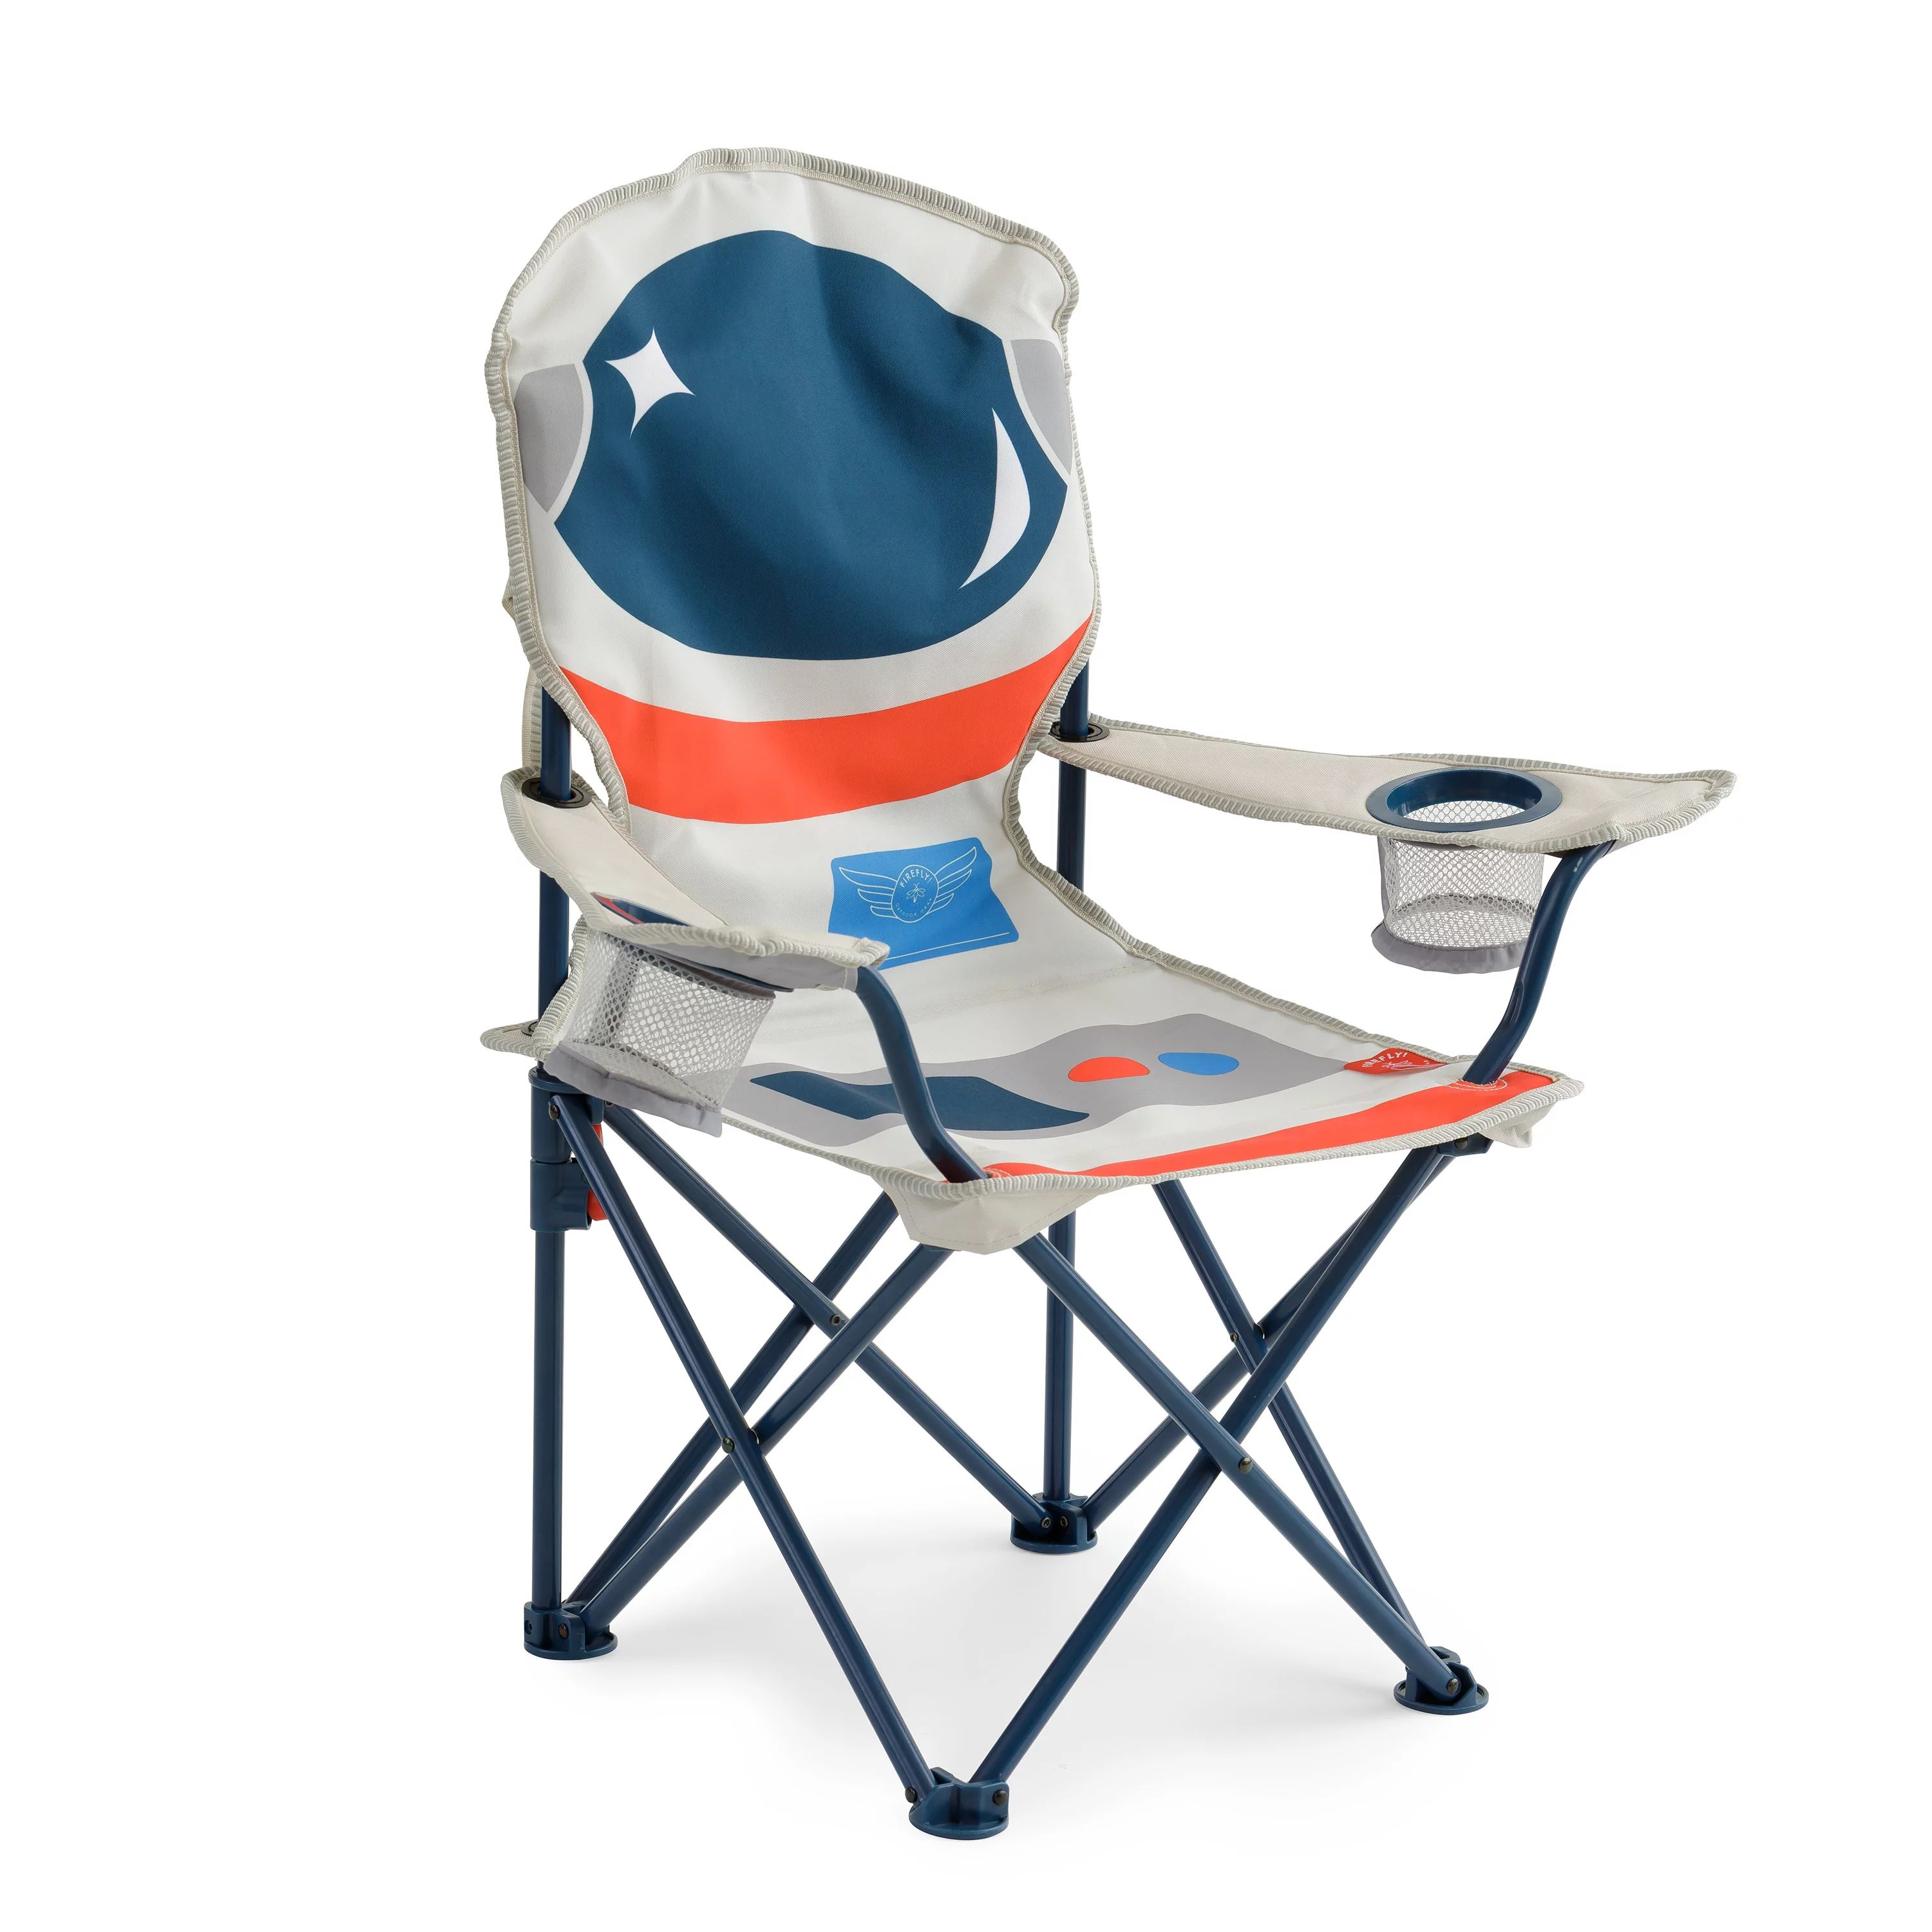 Firefly! Outdoor Gear Jett the Astronaut Kid's Camping Chair - Gray/Blue Color | Walmart (US)